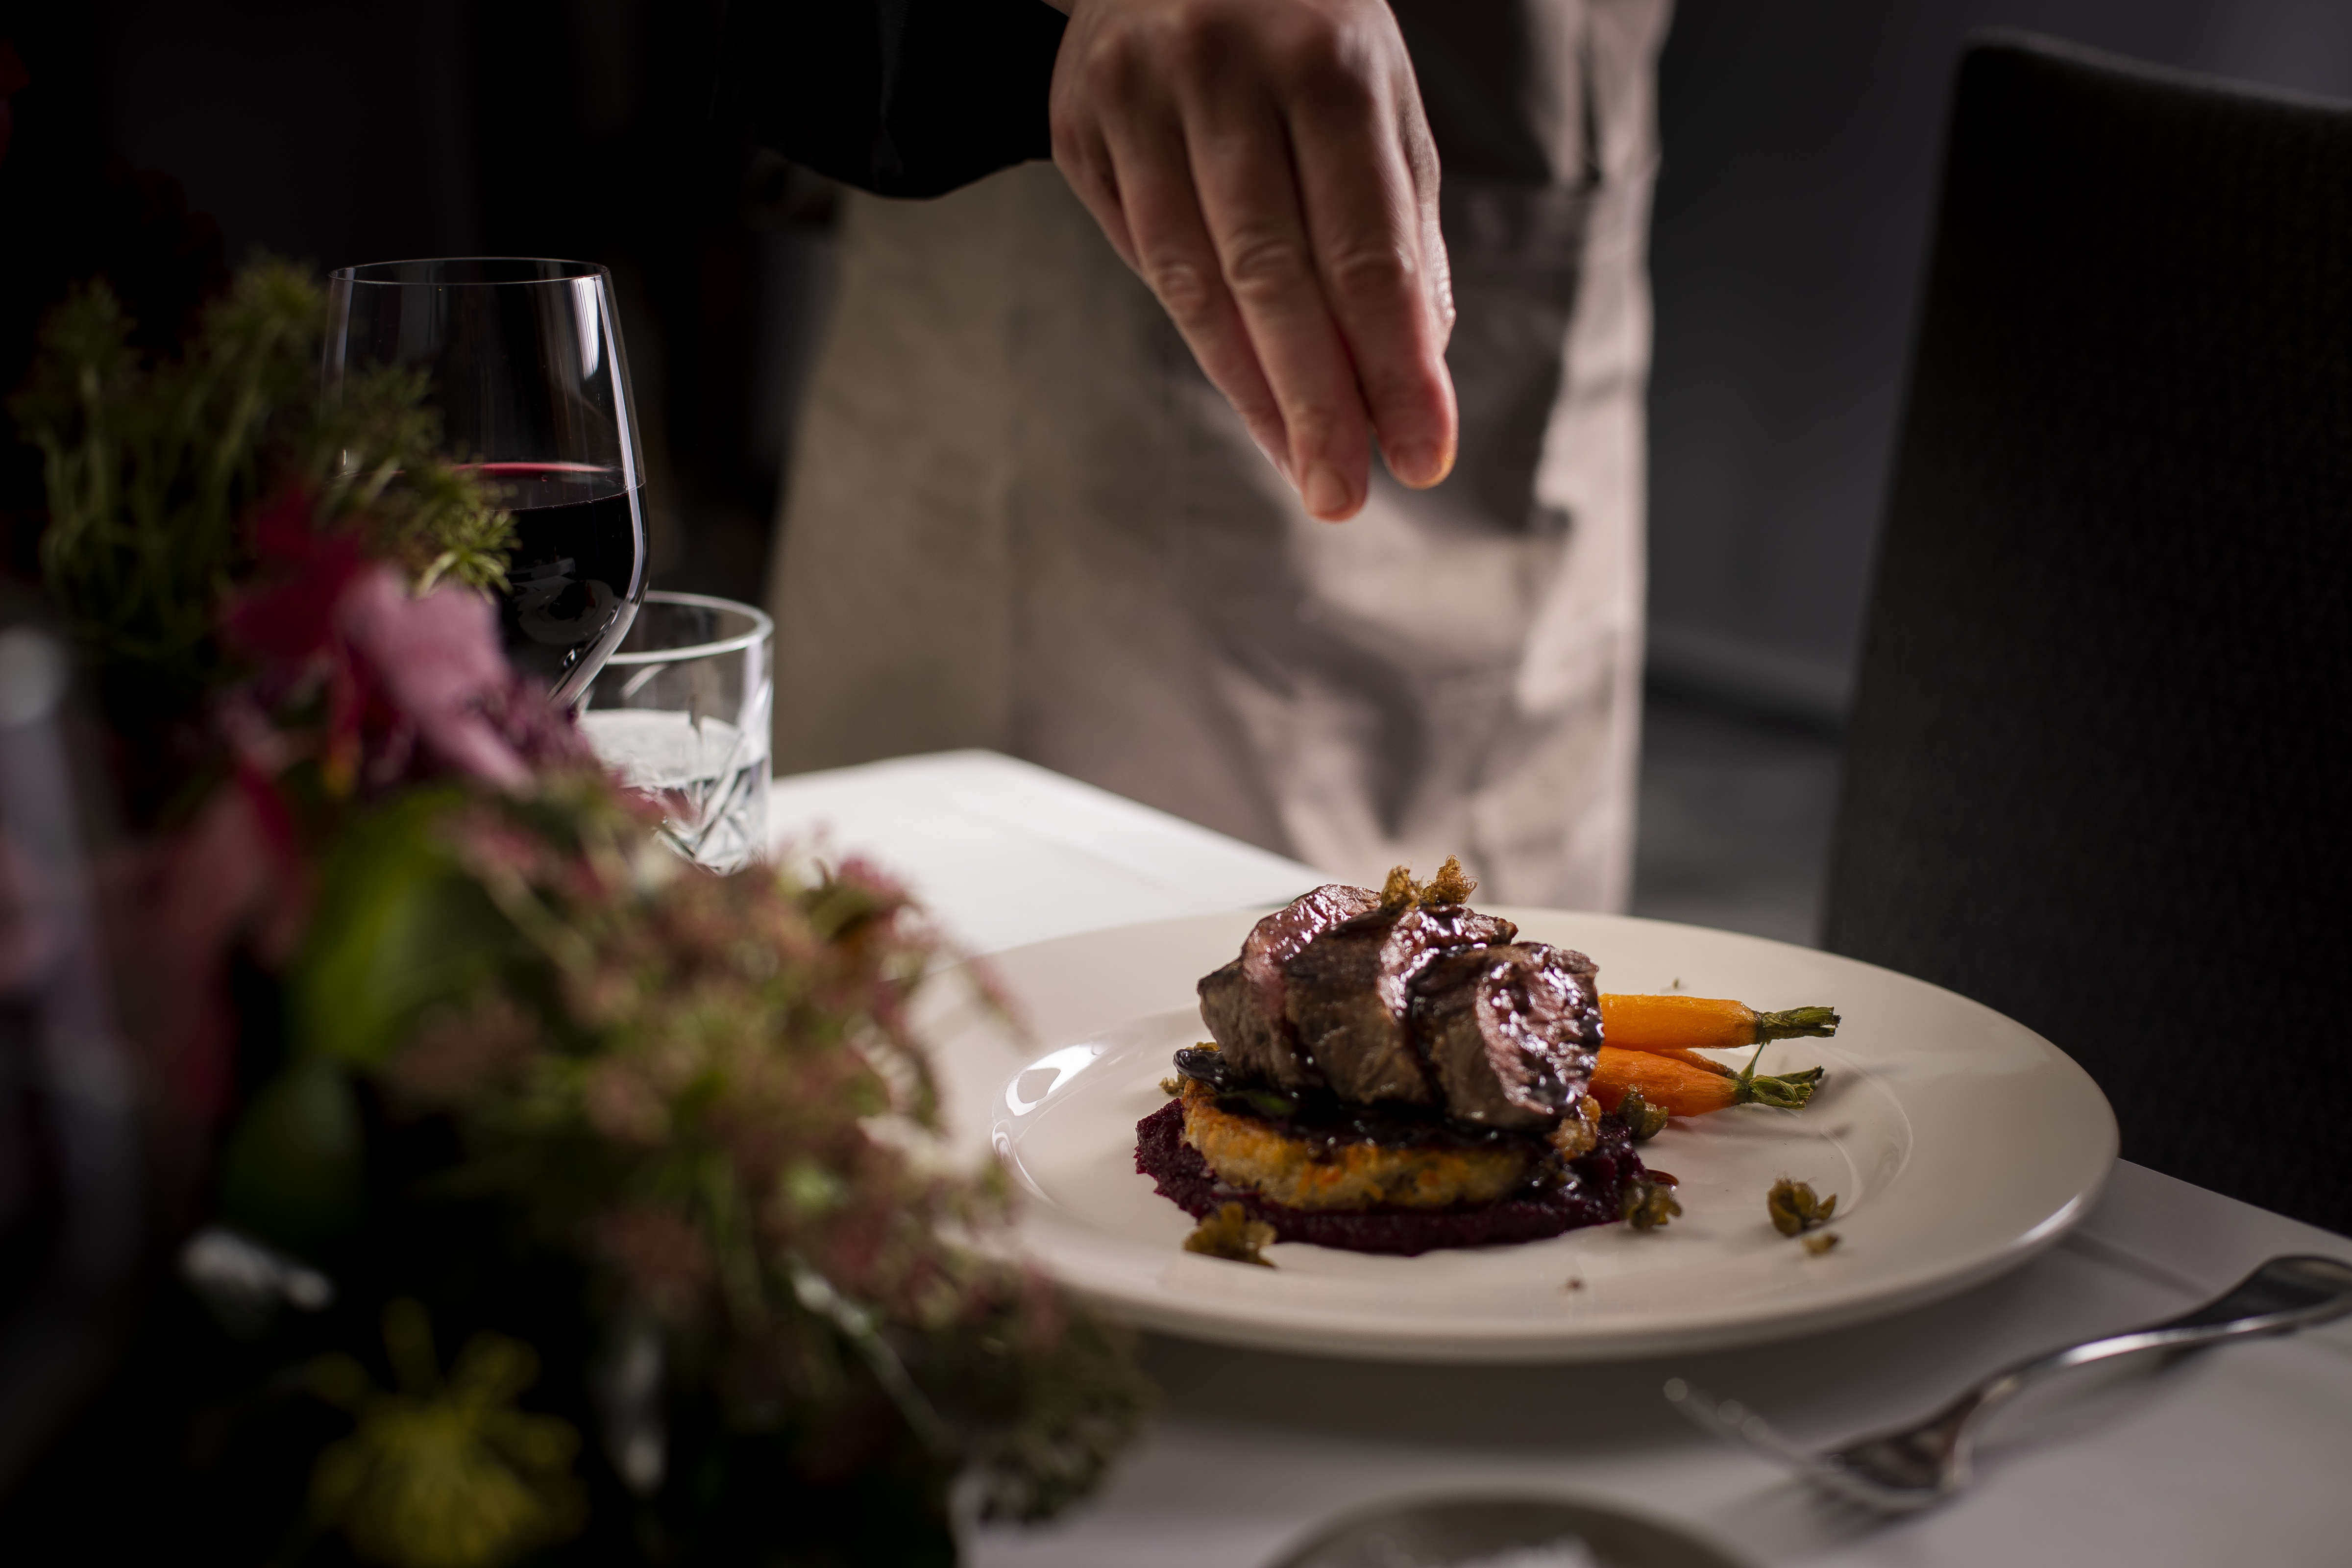 Roasted eye fillet slices on hashbrown with beetroot puree and roast baby carrots glazed with jus on a white dinner plate with fried capers being sprinkled on top. Photo: Richard Jupe.